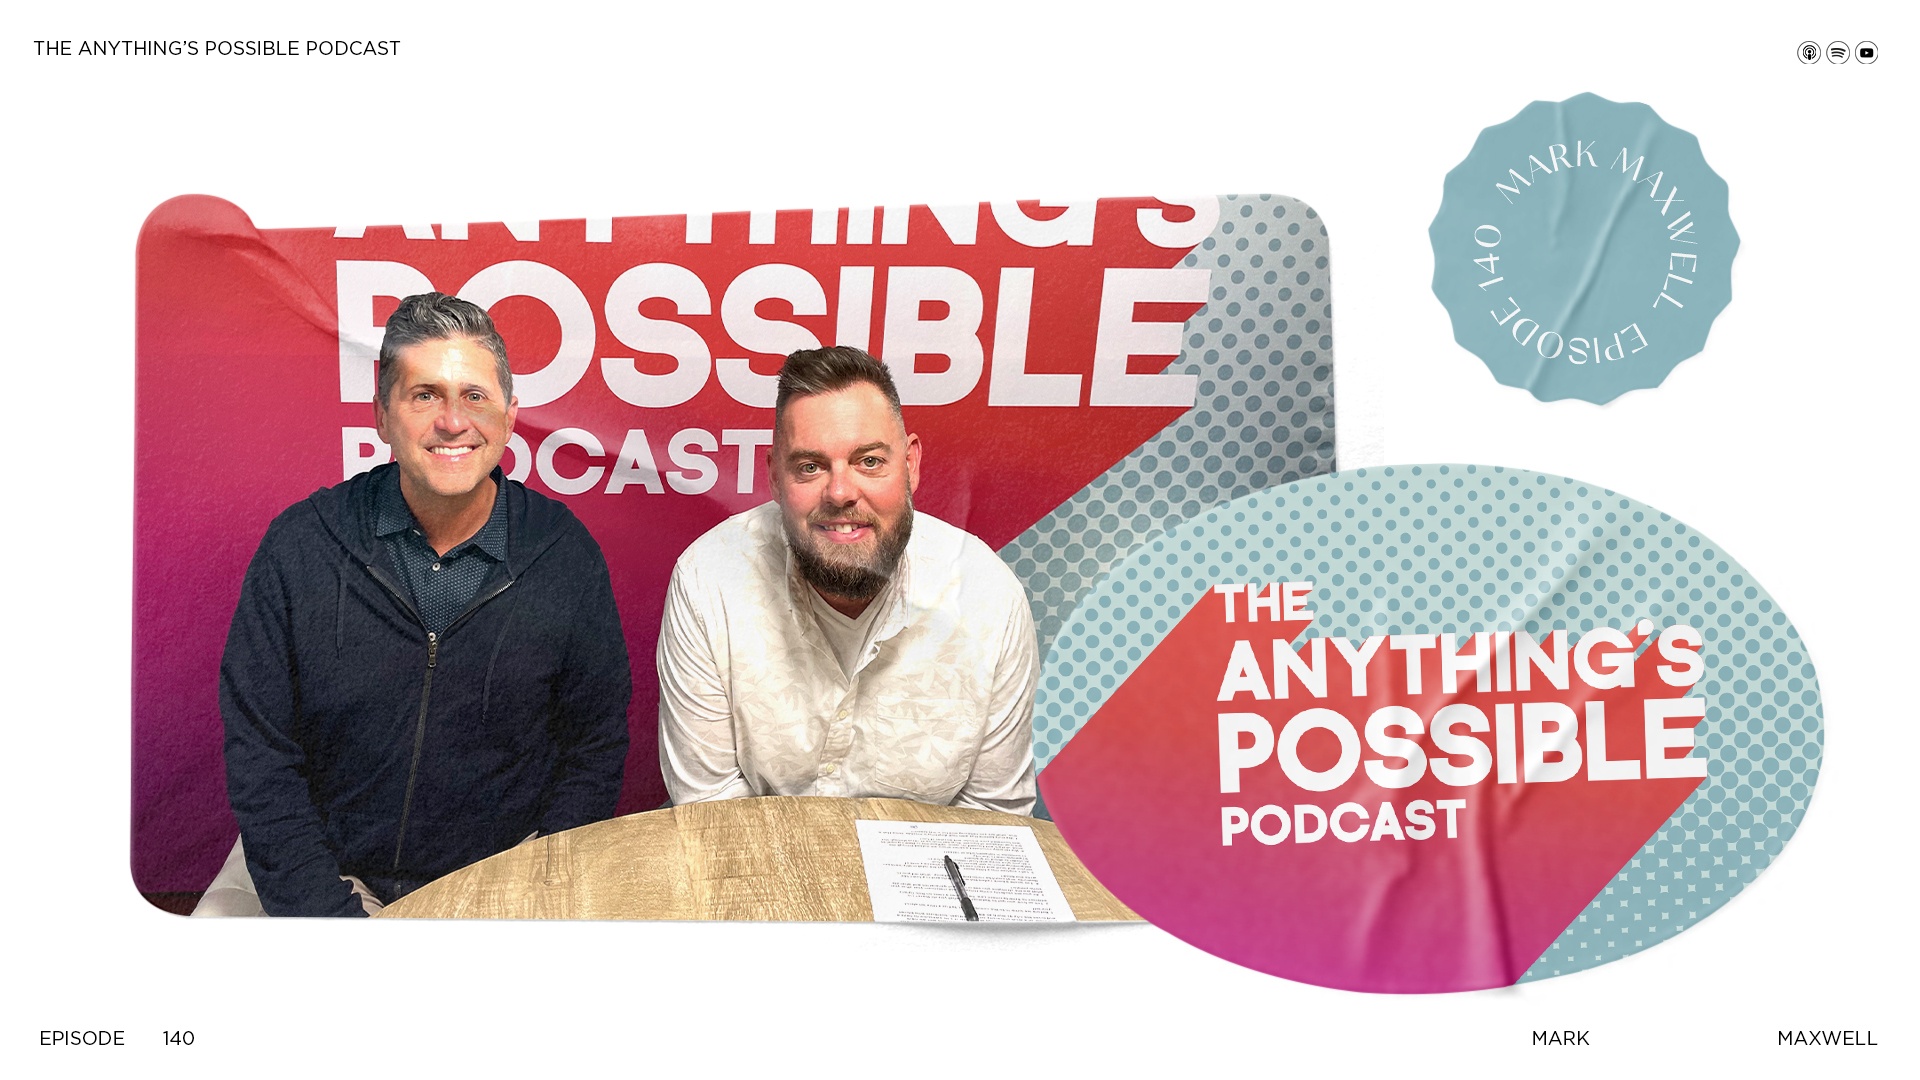 Mark Maxwell Drew Powell The Anything's Possible Podcast